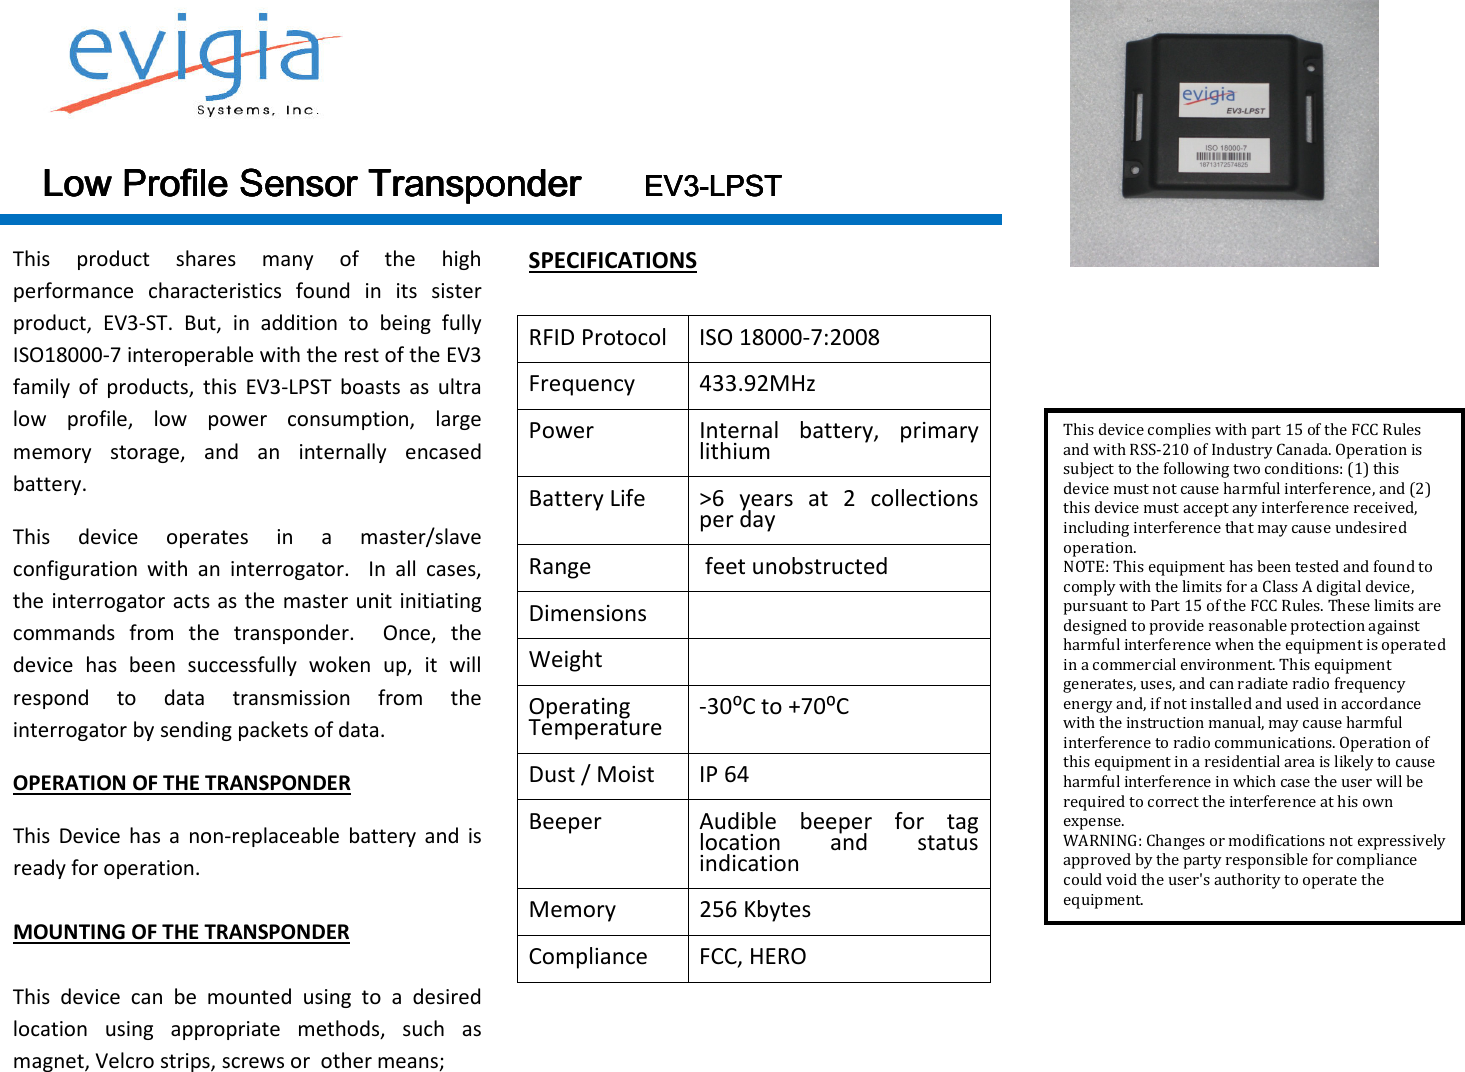  Low Profile SensorLow Profile SensorLow Profile SensorLow Profile Sensor    TransponderTransponderTransponderTransponder                        EV3EV3EV3EV3----LPSTLPSTLPSTLPST    This  product  shares  many  of  the  high performance  characteristics  found  in  its  sister product,  EV3-ST.  But,  in  addition  to  being  fully ISO18000-7 interoperable with the rest of the EV3 family  of  products,  this  EV3-LPST  boasts  as  ultra low  profile,  low  power  consumption,  large memory  storage,  and  an  internally  encased battery.  This  device  operates  in  a  master/slave configuration  with  an  interrogator.    In  all  cases, the interrogator acts as the master unit initiating commands  from  the  transponder.    Once,  the device  has  been  successfully  woken  up,  it  will respond  to  data  transmission  from  the interrogator by sending packets of data. OPERATION OF THE TRANSPONDER This  Device has  a  non-replaceable  battery  and  is ready for operation.   MOUNTING OF THE TRANSPONDER  This  device  can  be  mounted  using  to  a  desired location  using  appropriate  methods,  such  as magnet, Velcro strips, screws or  other means;  SPECIFICATIONS  RFID Protocol  ISO 18000-7:2008 Frequency  433.92MHz Power  Internal  battery,  primary lithium Battery Life  &gt;6  years  at  2  collections per day Range   feet unobstructed Dimensions   Weight   Operating Temperature  -30⁰C to +70⁰C Dust / Moist  IP 64 Beeper  Audible  beeper  for  tag location  and  status indication Memory  256 Kbytes Compliance  FCC, HERO           This device complies with part 15 of the FCC Rules and with RSS-210 of Industry Canada. Operation is subject to the following two conditions: (1) this device must not cause harmful interference, and (2) this device must accept any interference received, including interference that may cause undesired operation. NOTE: This equipment has been tested and found to comply with the limits for a Class A digital device, pursuant to Part 15 of the FCC Rules. These limits are designed to provide reasonable protection against harmful interference when the equipment is operated in a commercial environment. This equipment generates, uses, and can radiate radio frequency energy and, if not installed and used in accordance with the instruction manual, may cause harmful interference to radio communications. Operation of this equipment in a residential area is likely to cause harmful interference in which case the user will be required to correct the interference at his own expense. WARNING: Changes or modifications not expressively approved by the party responsible for compliance could void the user&apos;s authority to operate the equipment. 